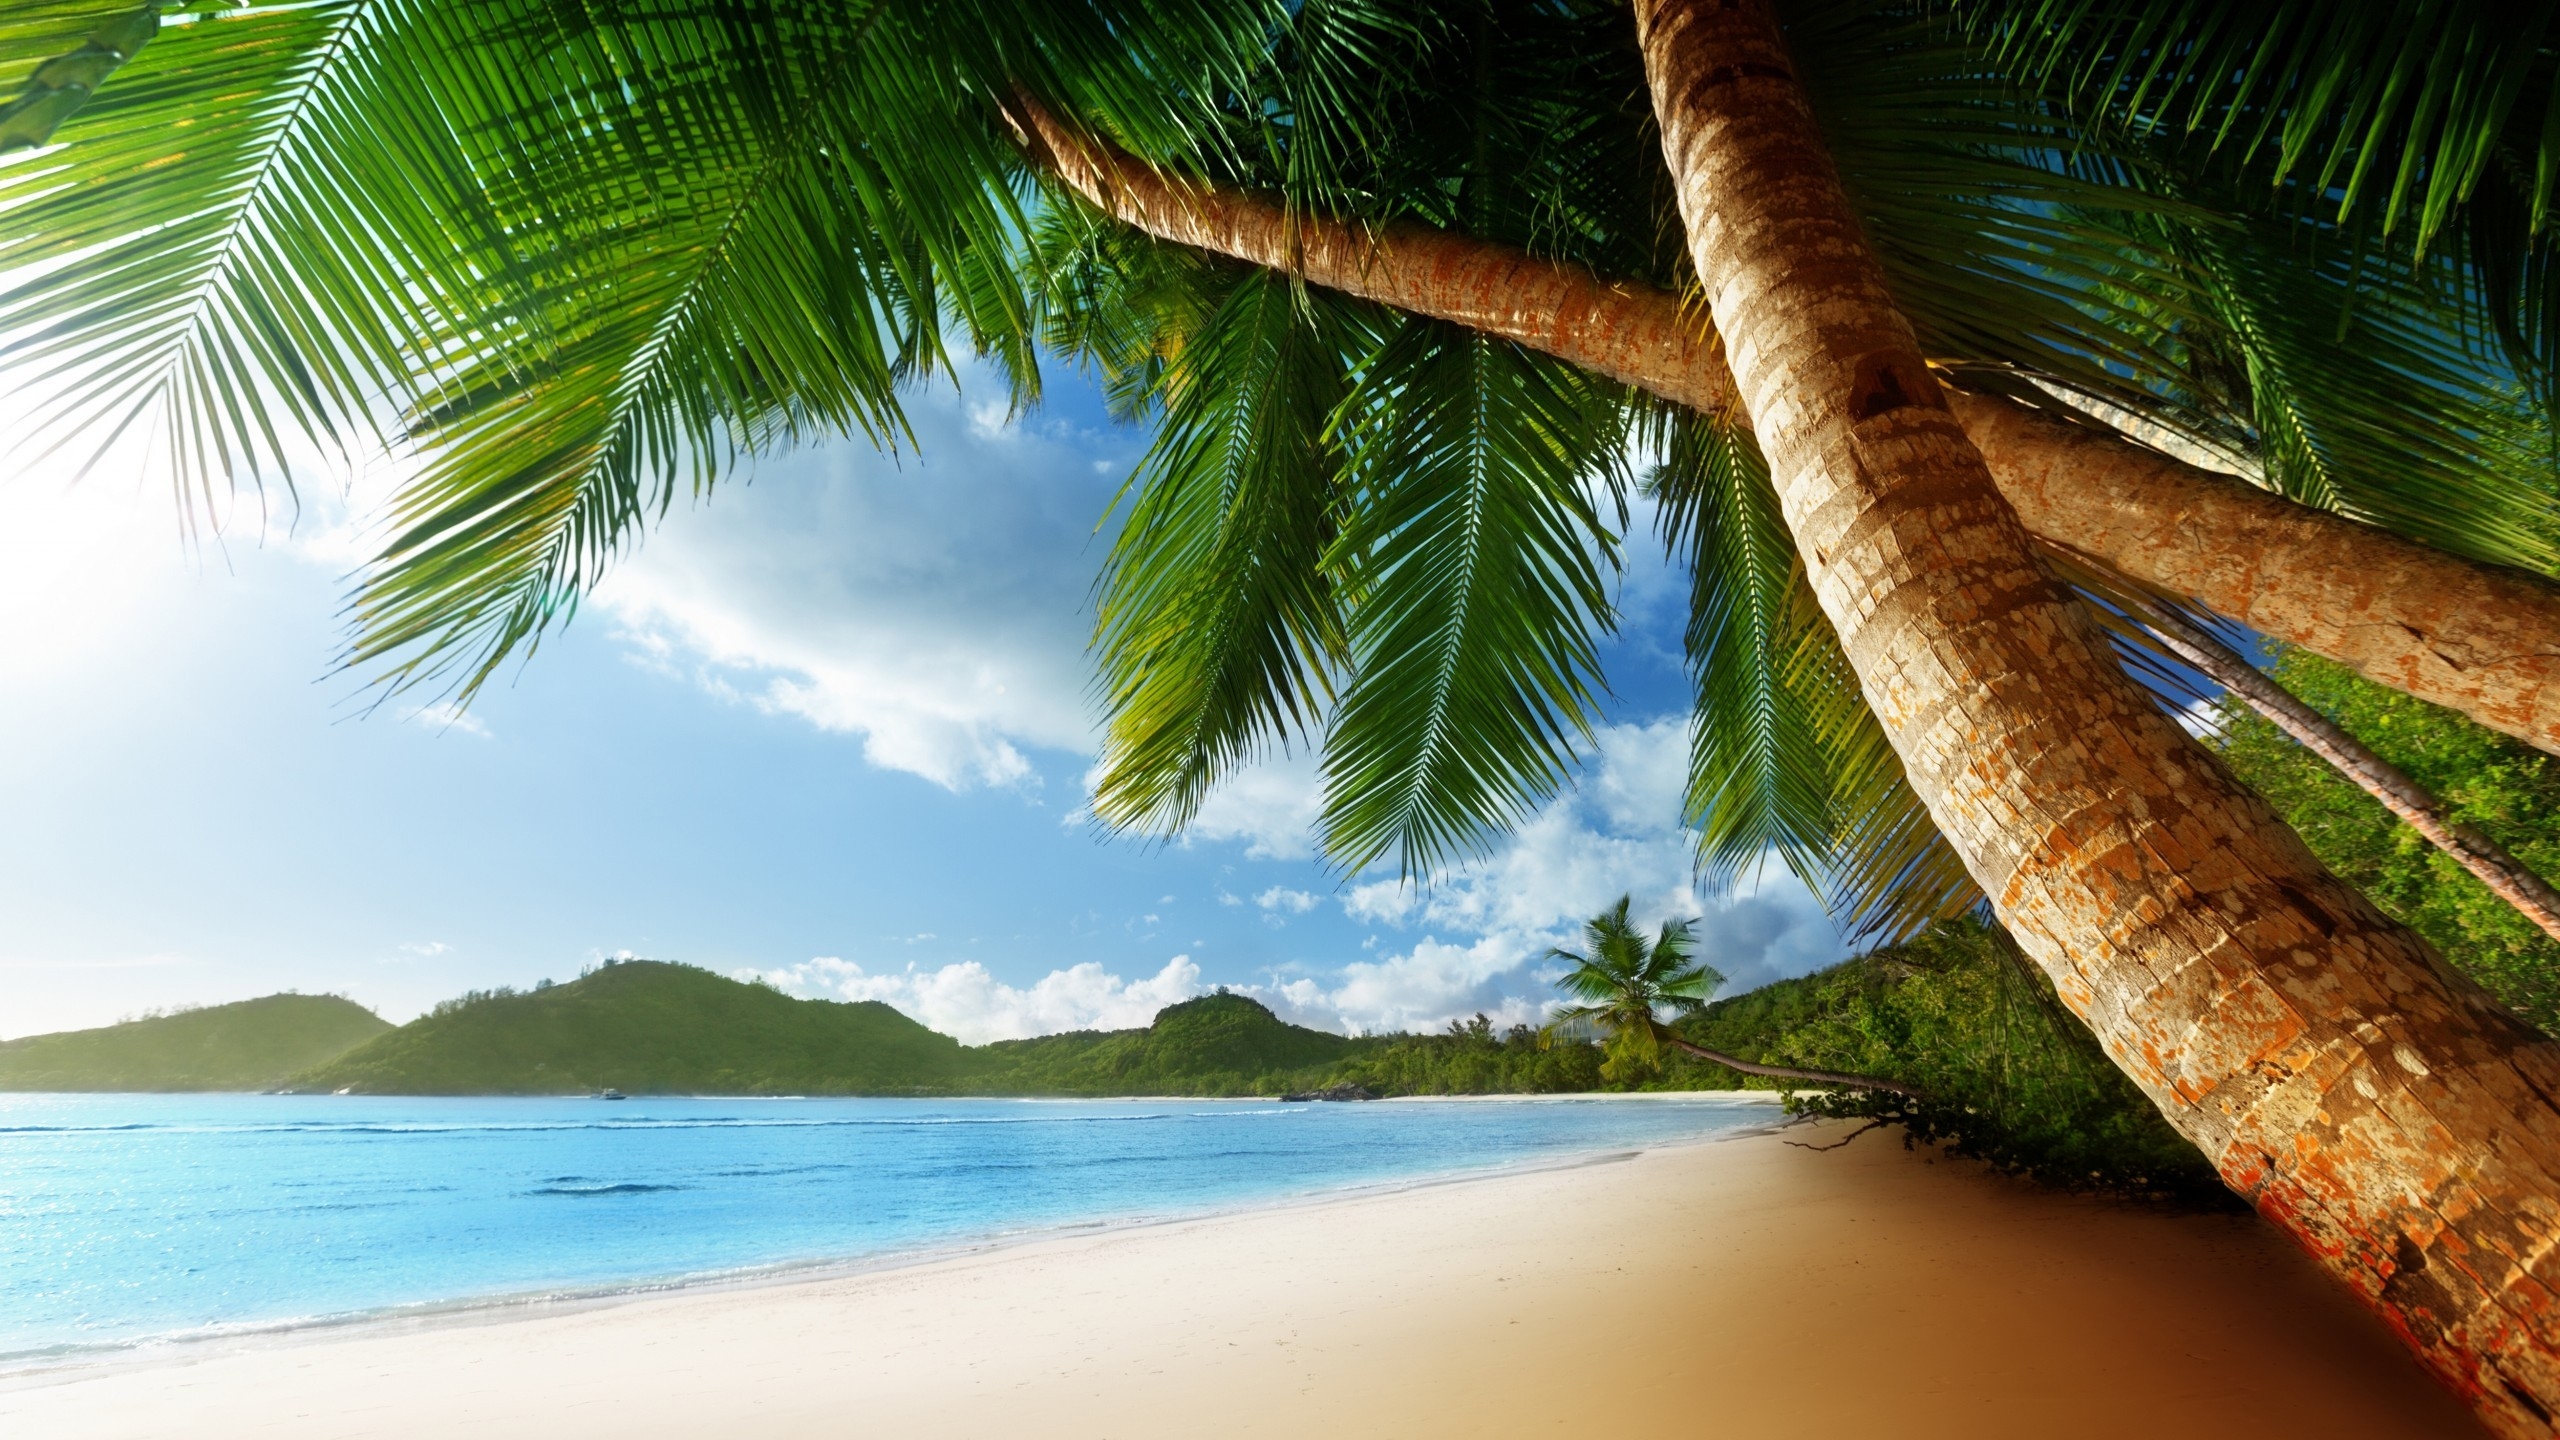 Exotic Palm Island for 2560x1440 HDTV resolution